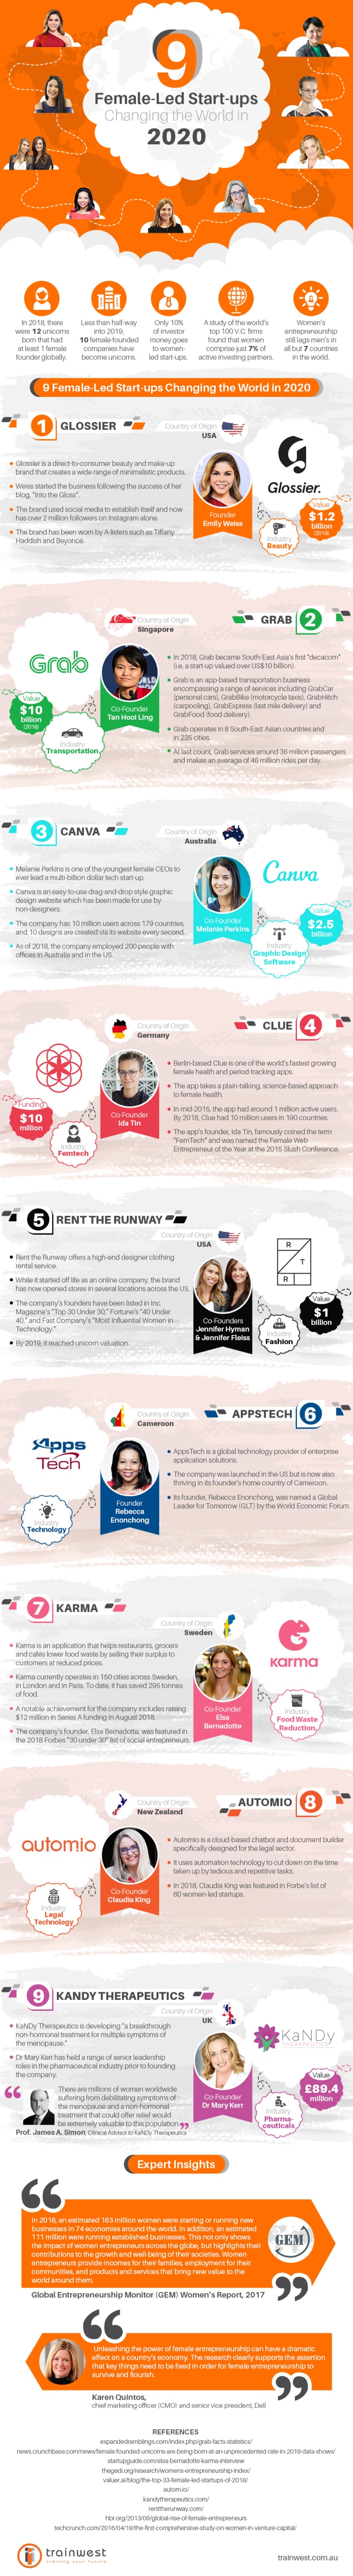 Female-Start-Ups-Changing-the-world-in-2020-infographic  